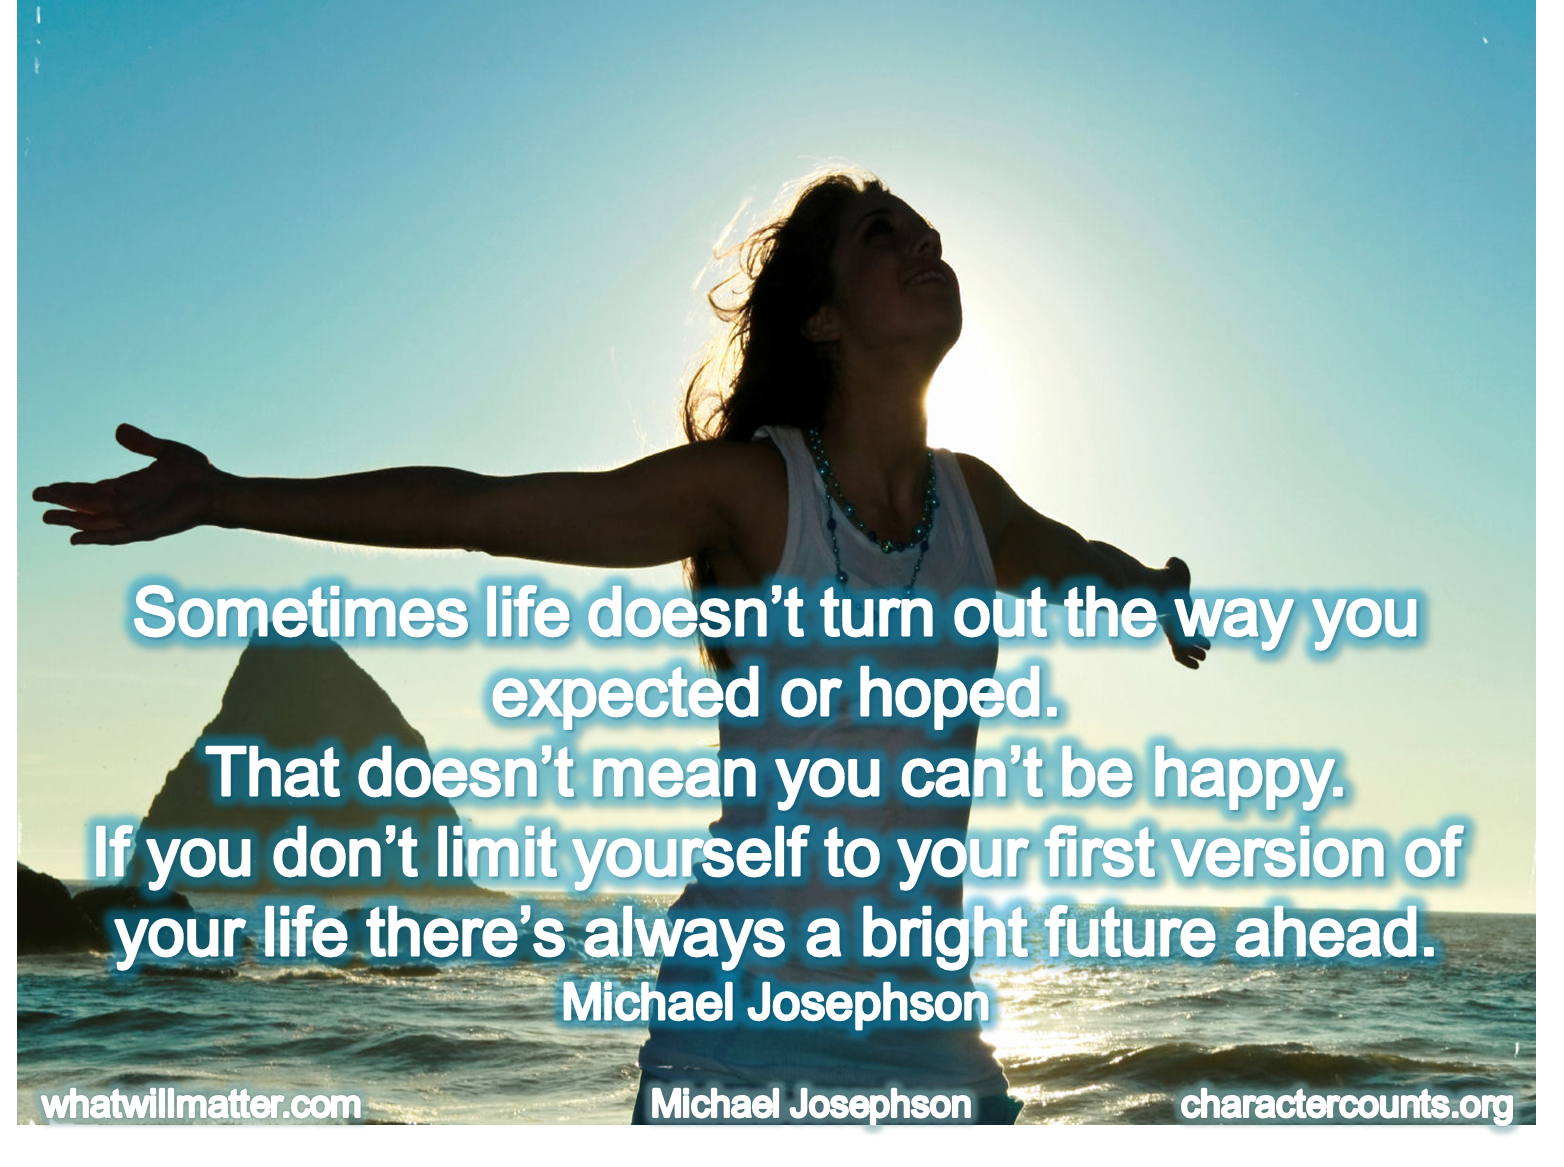 Sometimes life gets. Bright Future quotes. Sometimes Life. Quotes about Bright Future. Be Happy with the way you are.